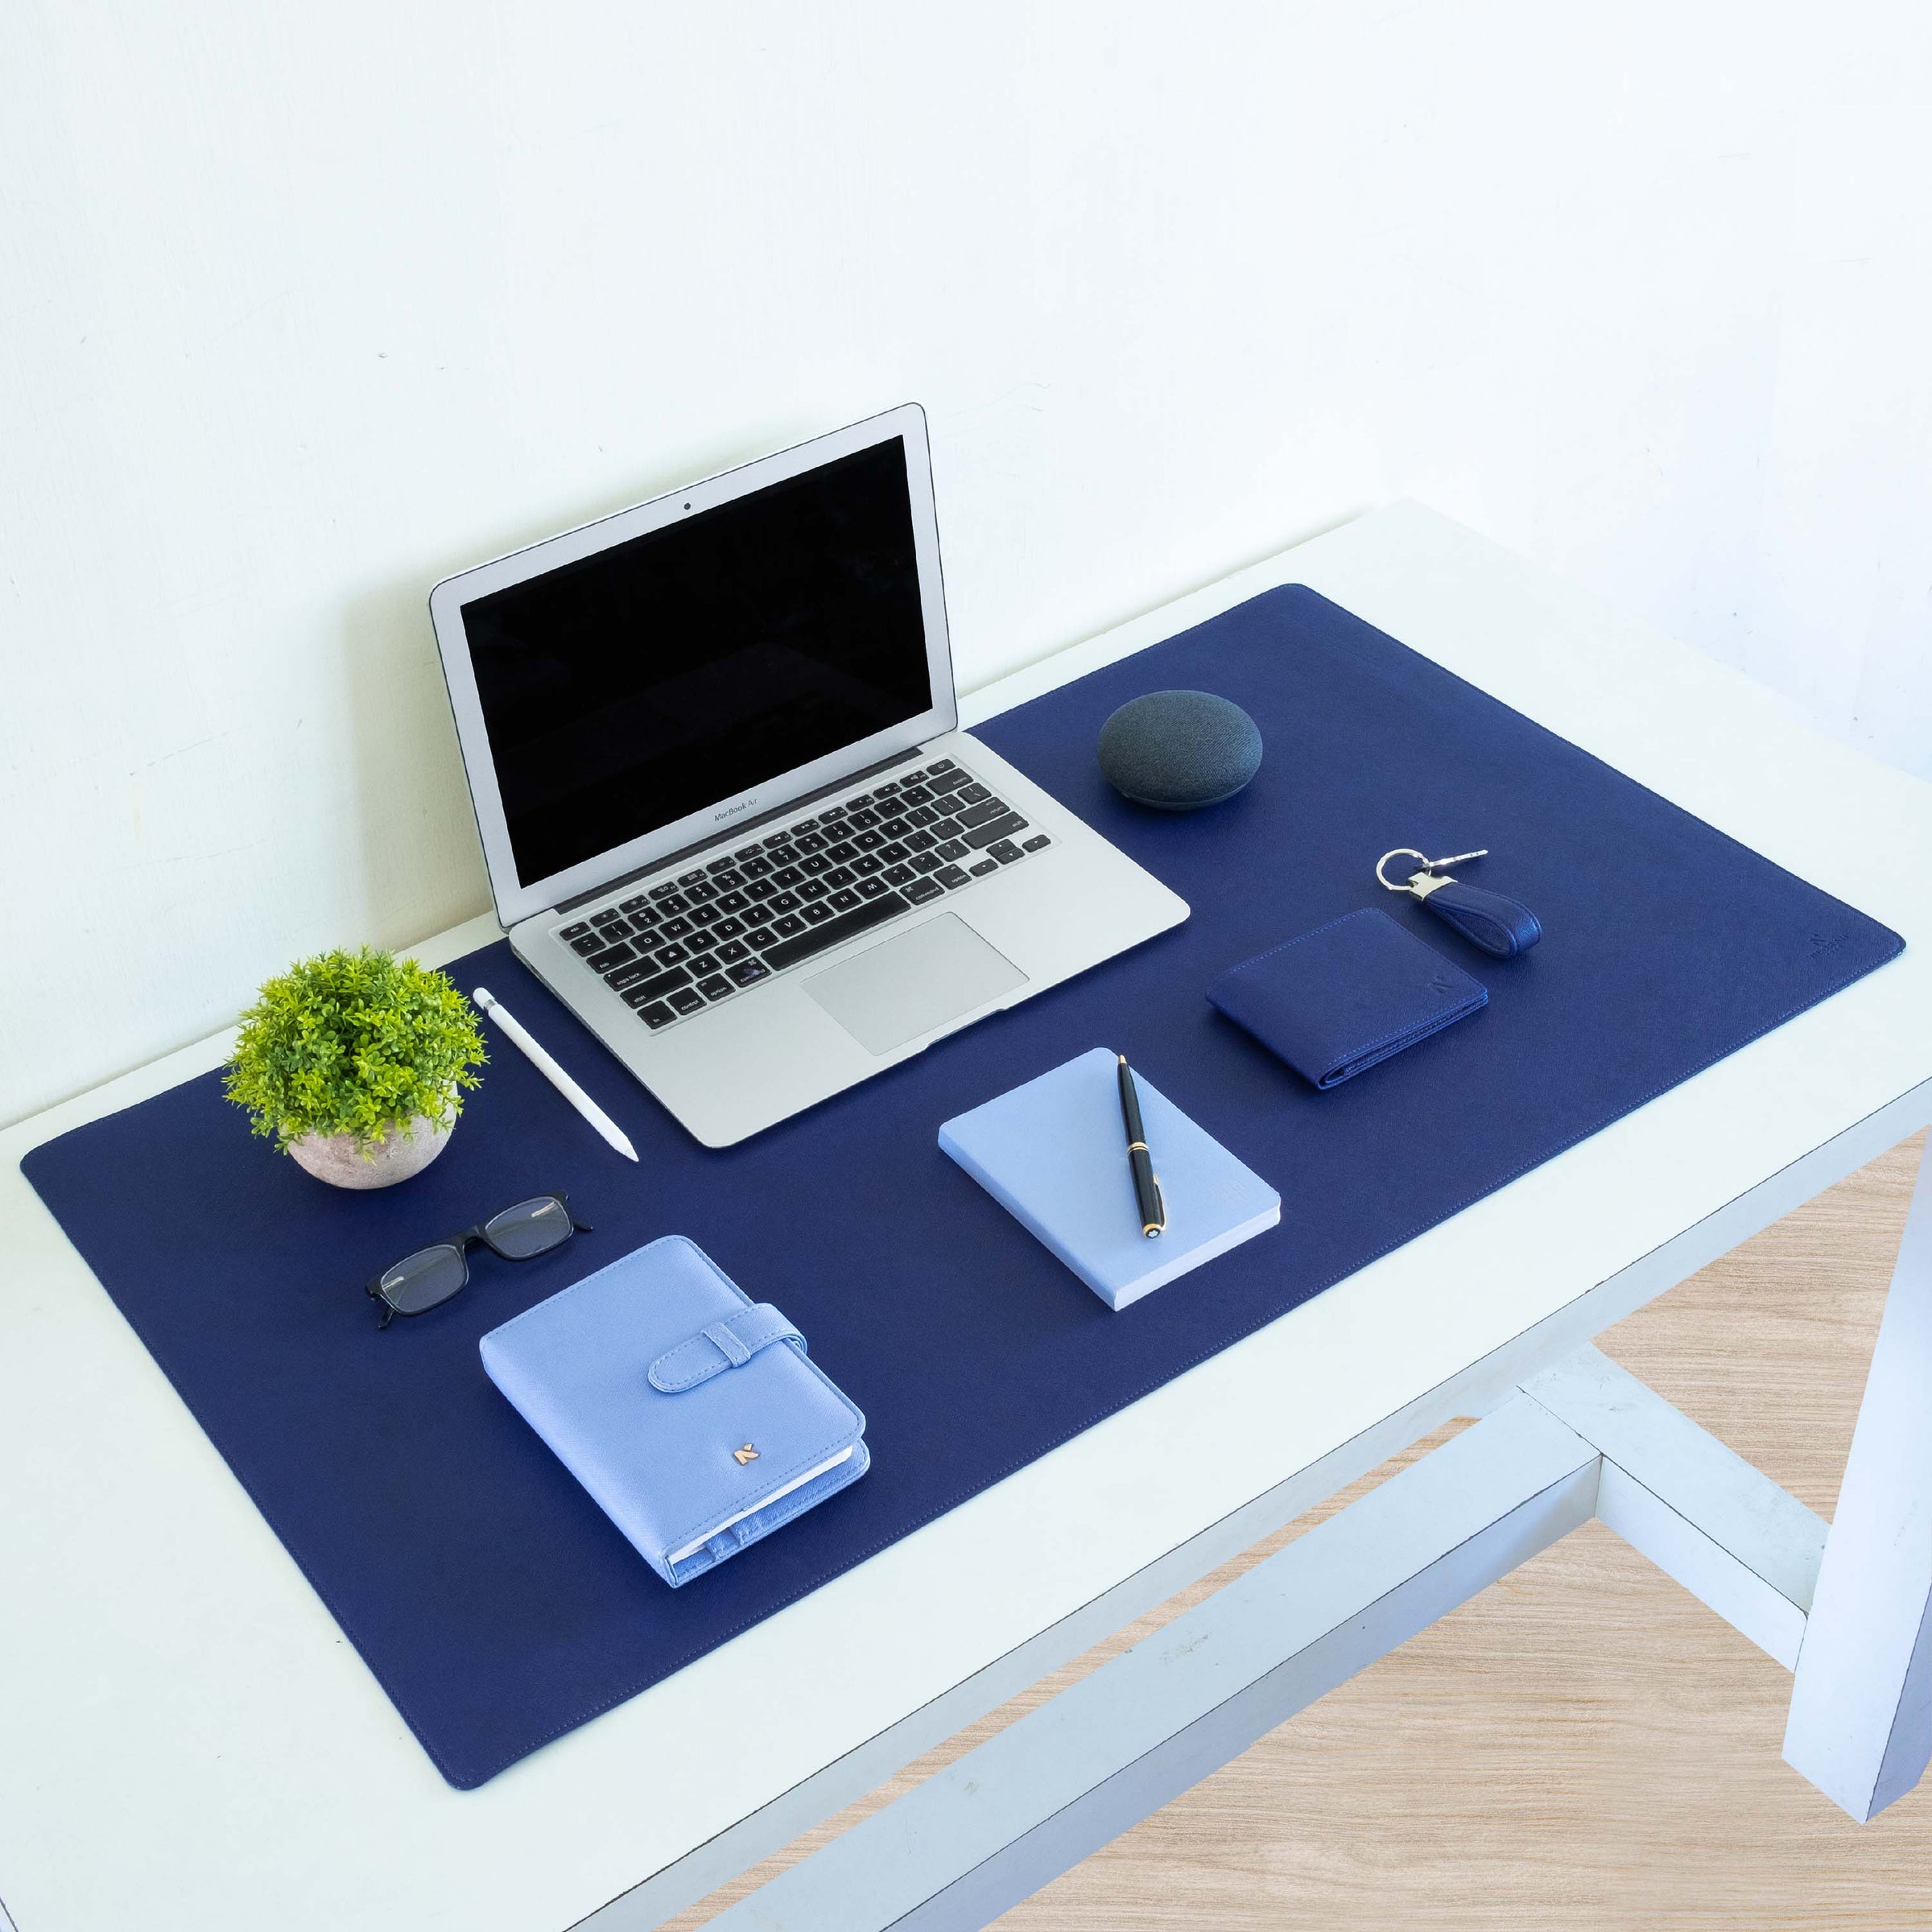 Neorah Desk Mat has a wide surface of (90cm x 45cm). Large enough to accommodate your office essentials Laptop, Mouse and Keyboard, Phone, Pen, Journal and other Stationery items.